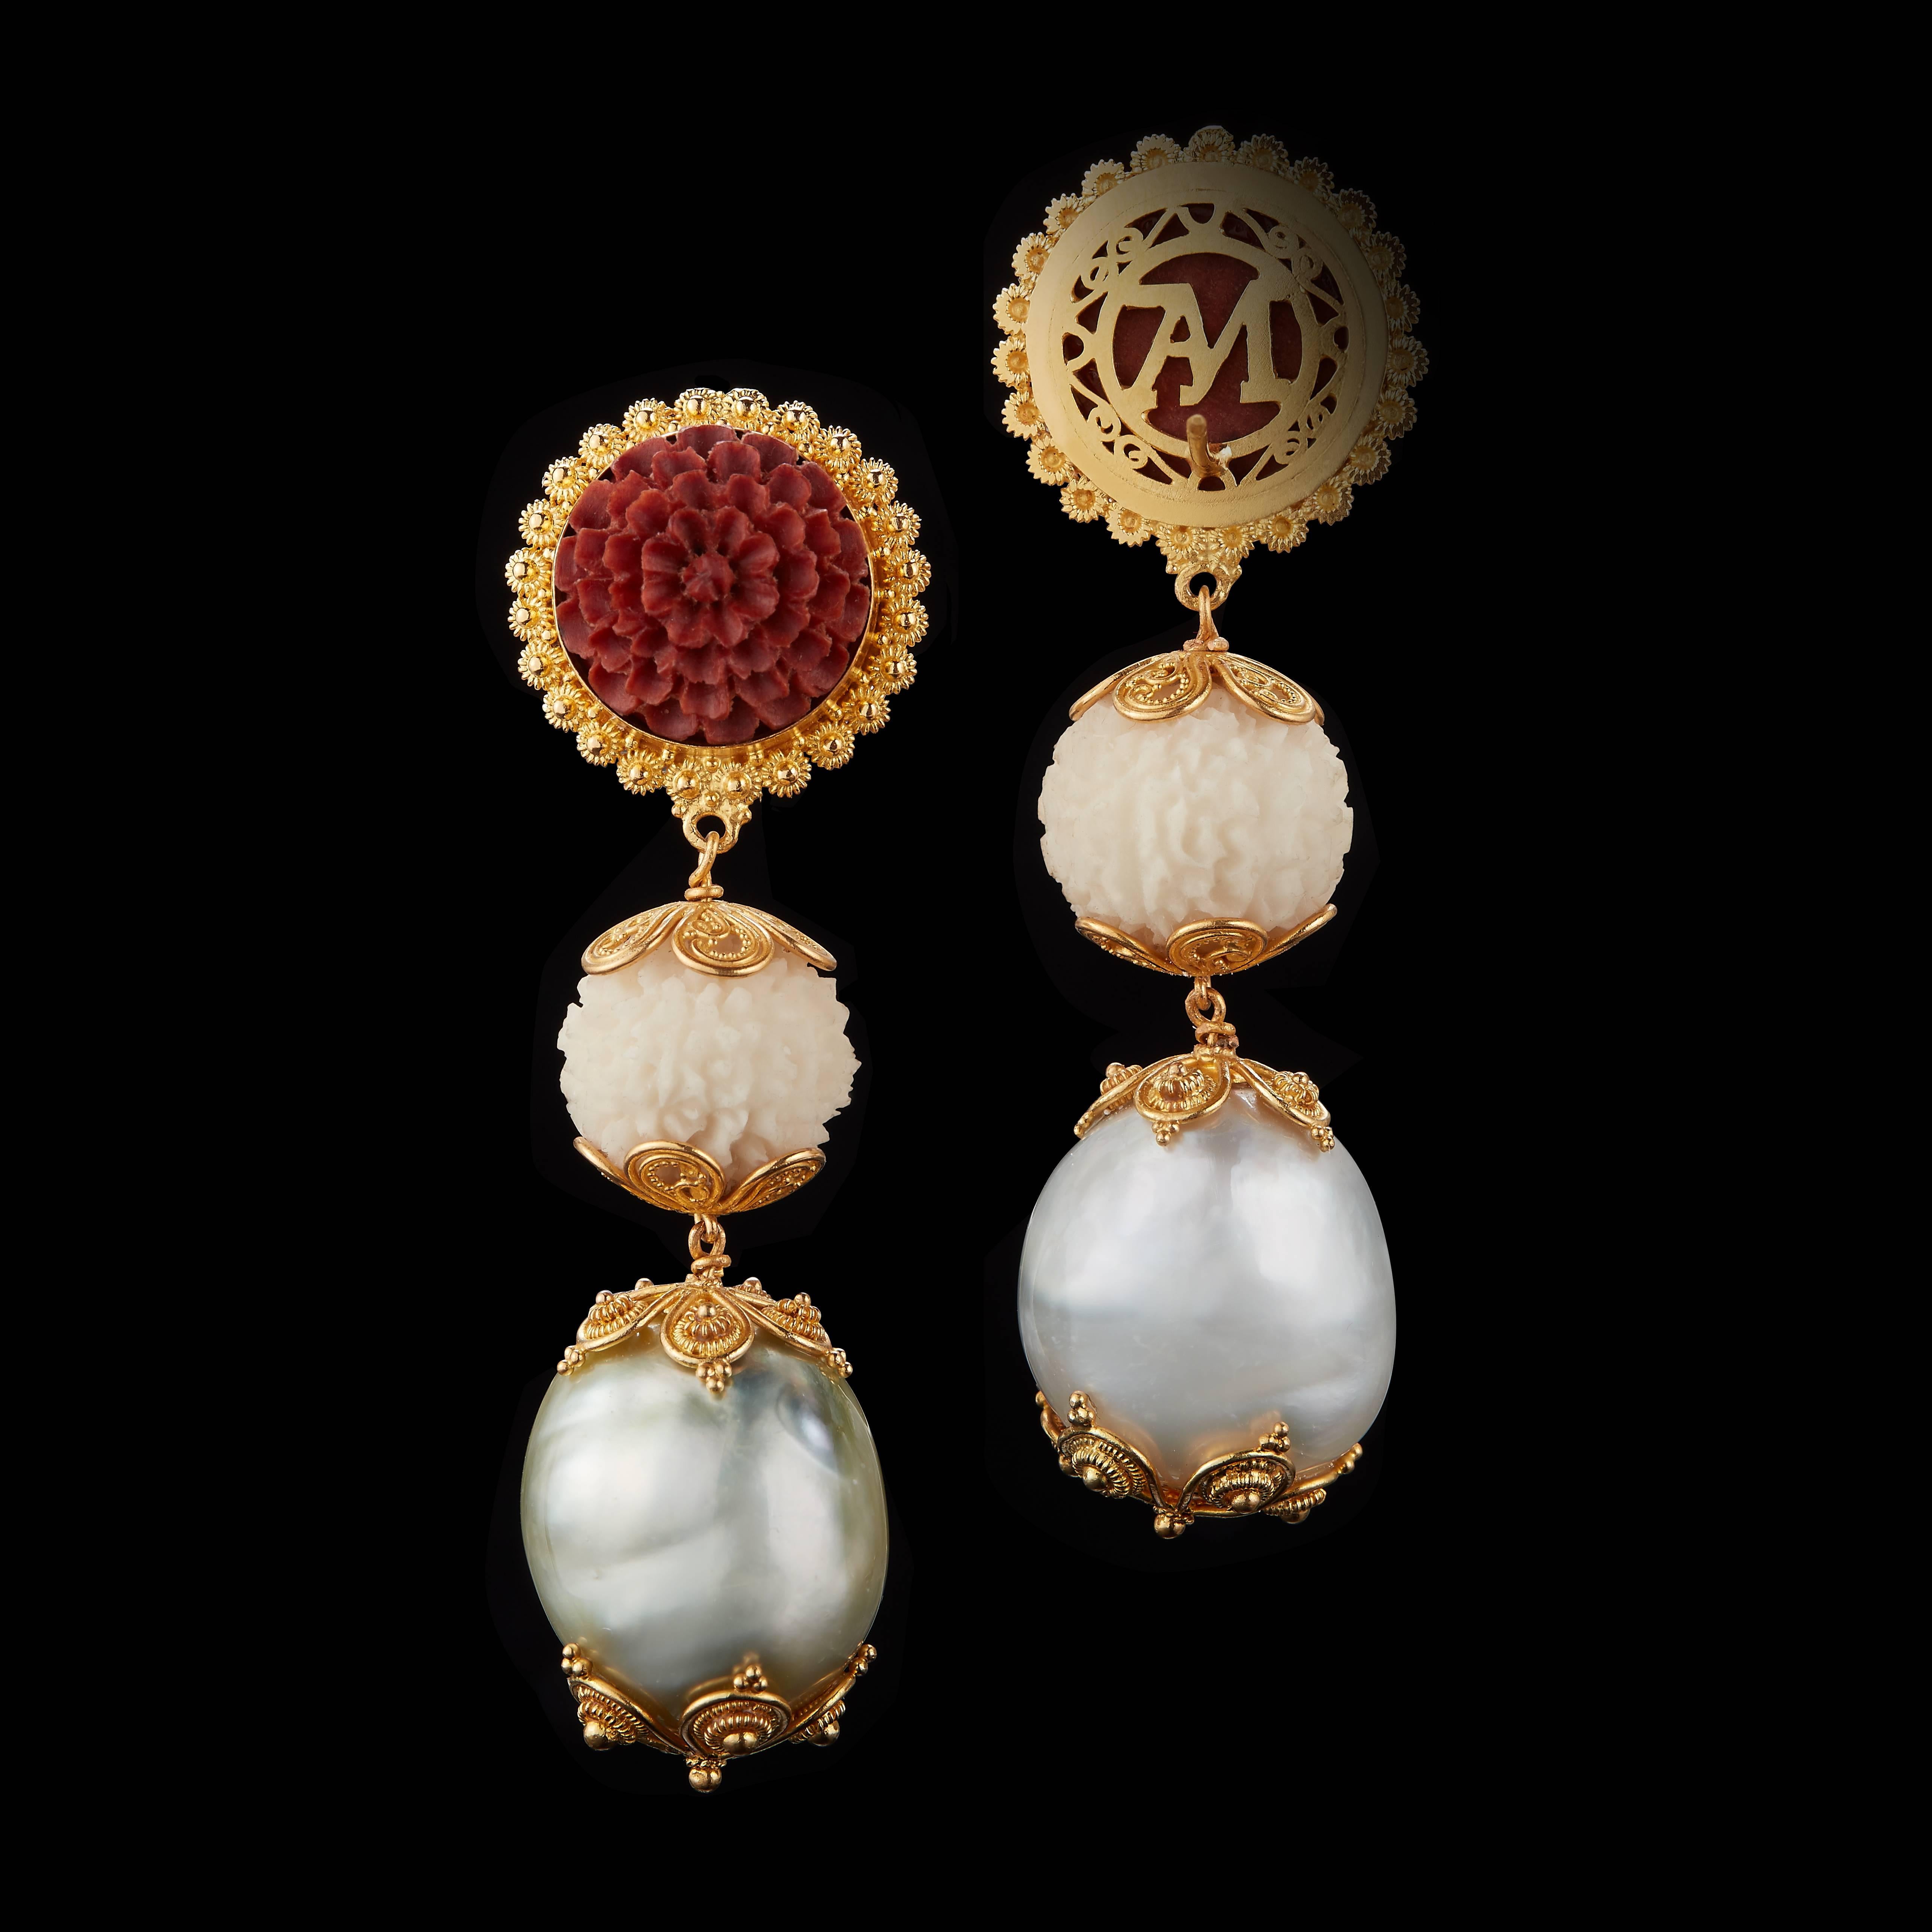 This pair of three-tier earrings feature intricately carved 14.65mm Sawo wood flowers, wild-harvested Tagua seed Rudrakshas and grey-white Baroque Pearls. Accented by prolific 22 karat yellow gold hand carvings, these limited edition
earrings are